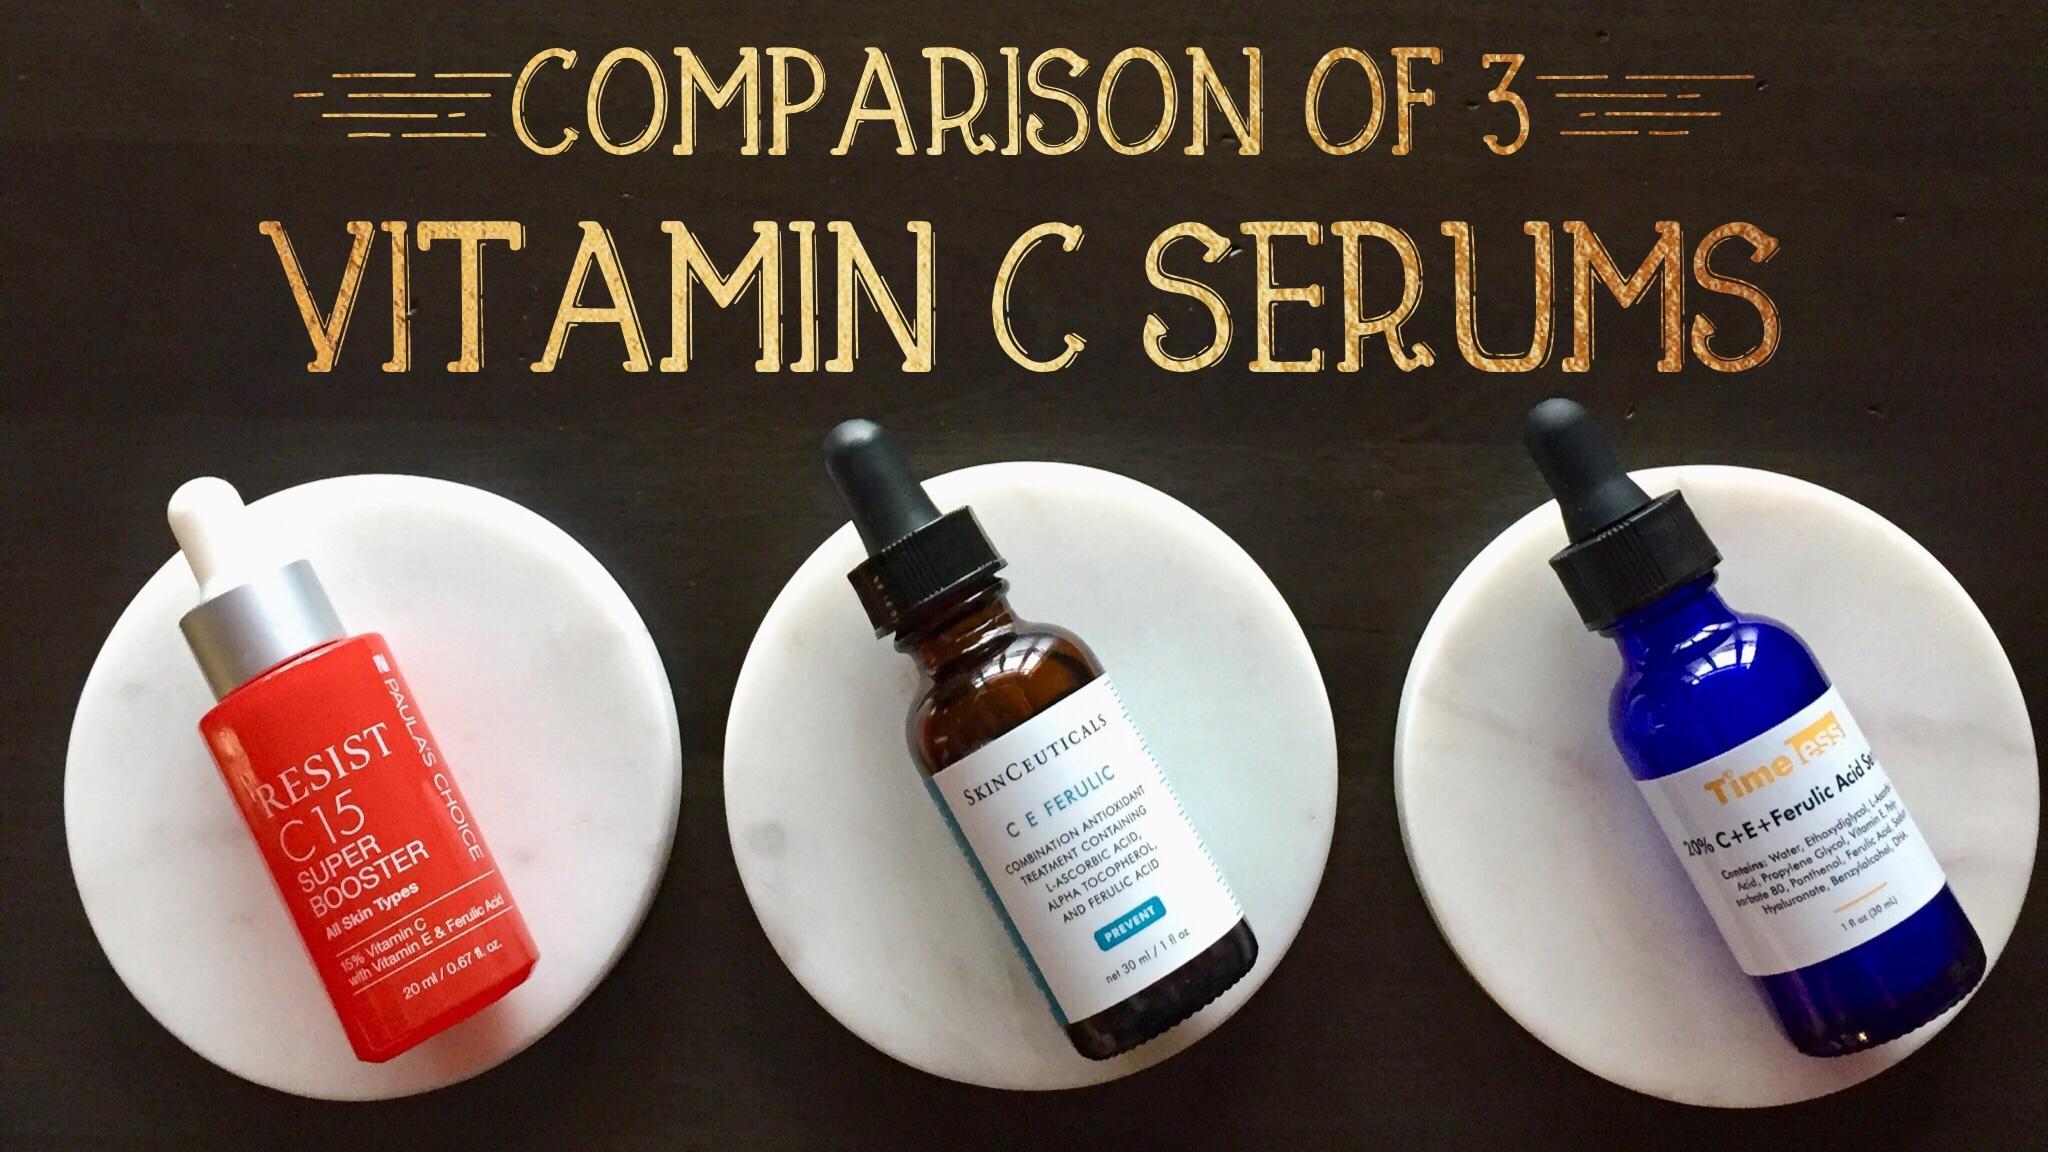 Three bottles of different brands of vitamin C serums.